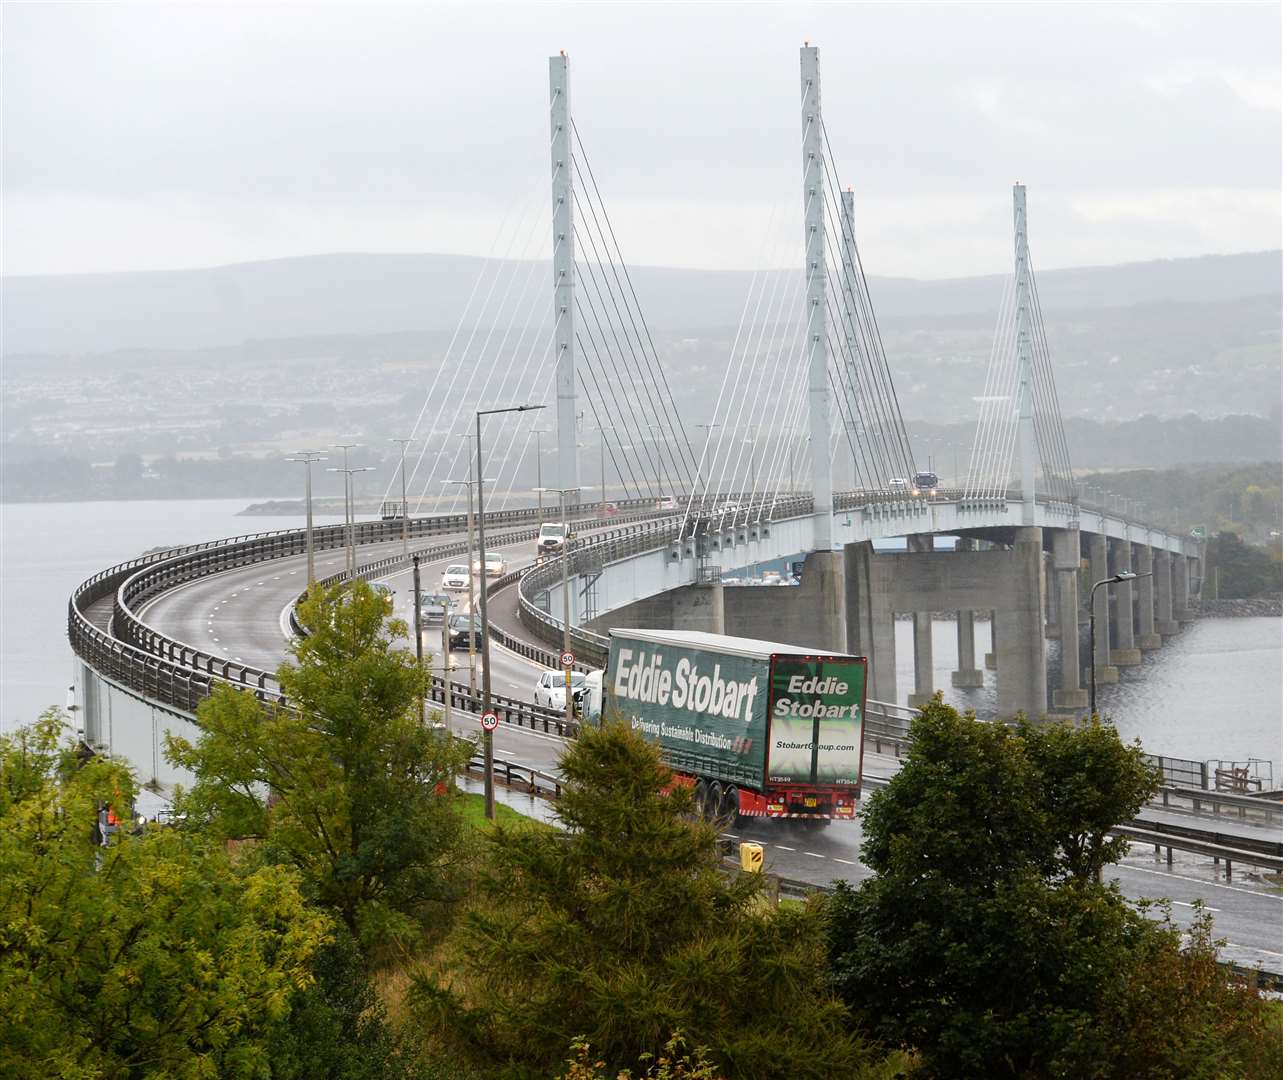 The Kessock Bridge in Inverness was the location of a protest against high fuel prices.